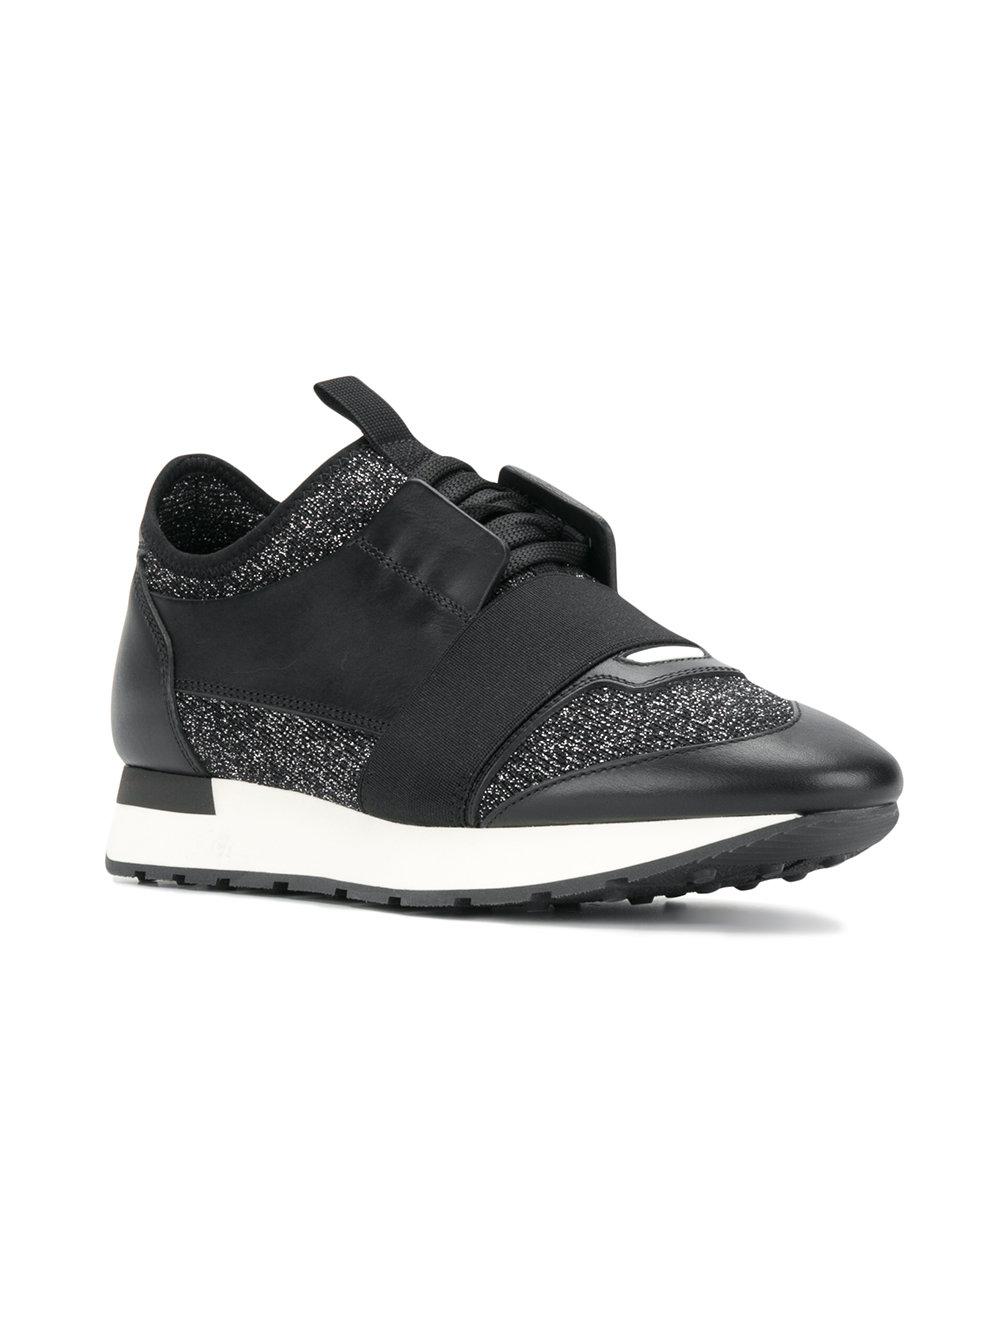 Balenciaga Leather Race Runners in Black - Lyst